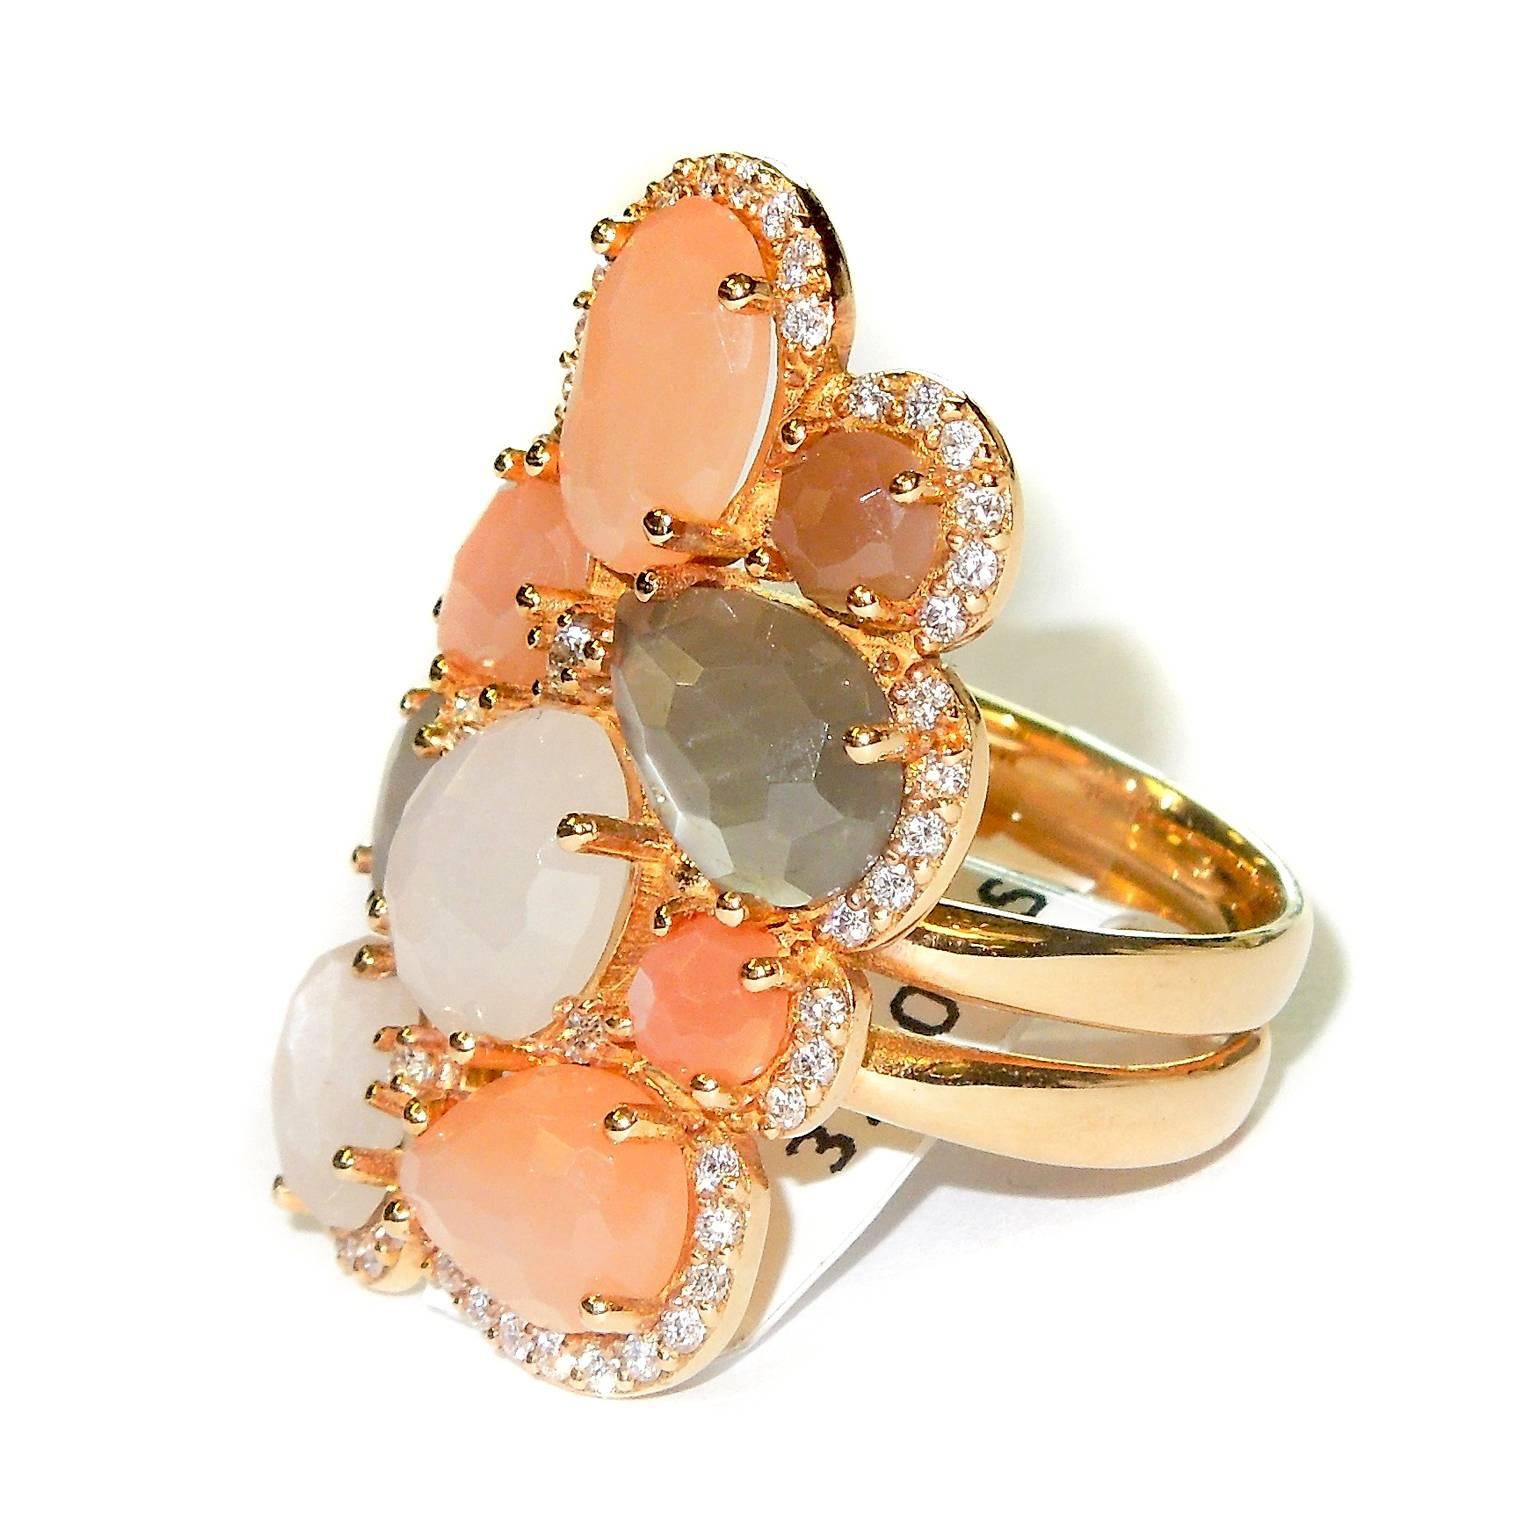 18K Rose Gold Ring with Moonstones and Diamonds

Apprx. 9.00ct. Moonstones

0.43ct. G Color, VS Clarity Diamonds

Double shank ring, so it does not turn on finger.

10.80 grams 18k gold

Size 7.5. Can be sized.

1.2 inch L x 0.7 inch W

Estate